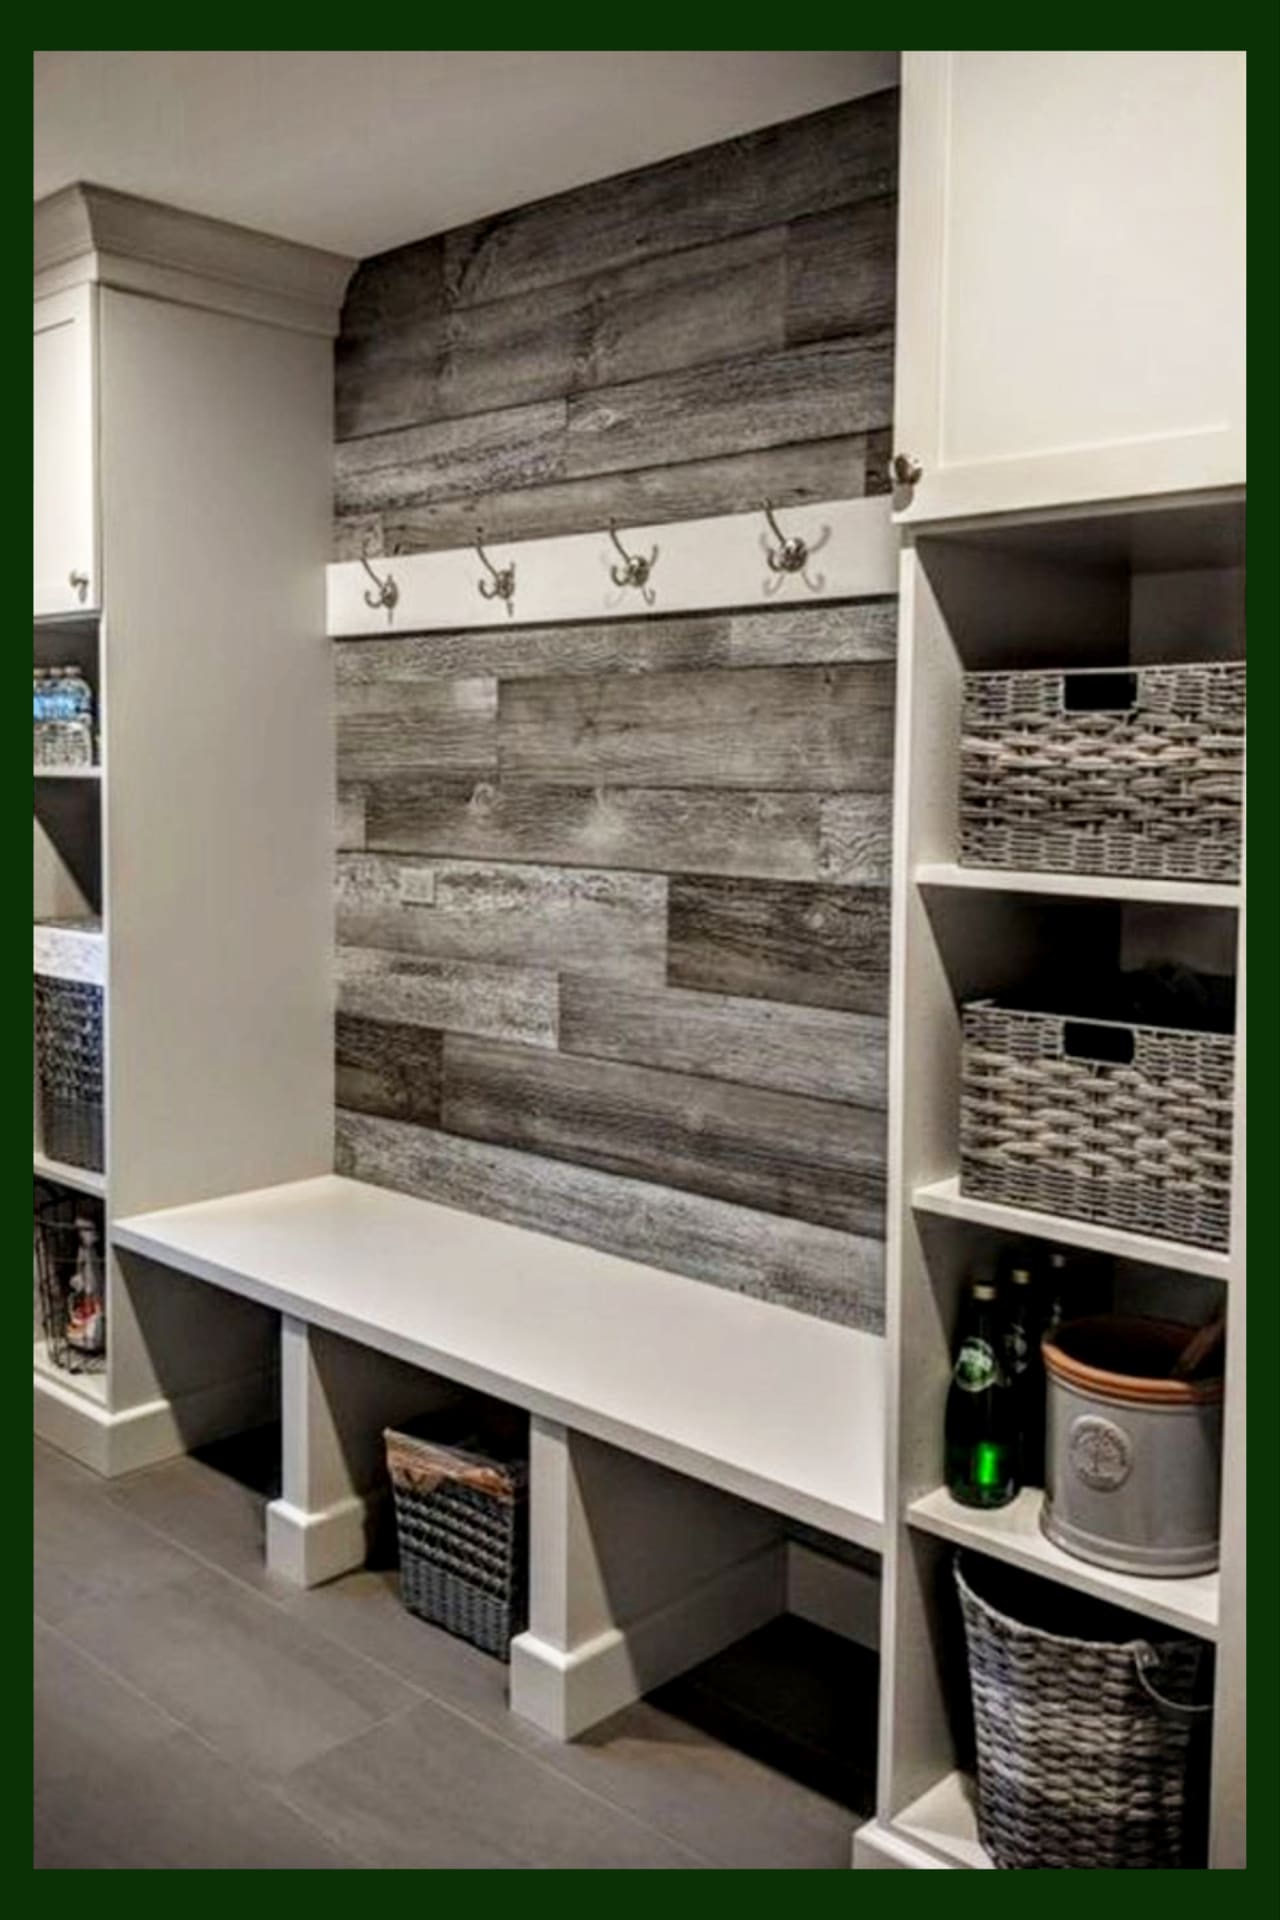 Rustic Mudroom Ideas and Farmhouse Mudroom Entryway Ideas (in country farmhouse style) DIY mudroom designs for your laundry area, entryway, garage, closet, and more. Rustic farmhouse mud rooms and small mud room ideas. Mud room furniture, entryway bench DIY w/ storage for small spaces, breezeway ideas and mudroom ideas entryway, foyer or out room. Love the pallet wall!